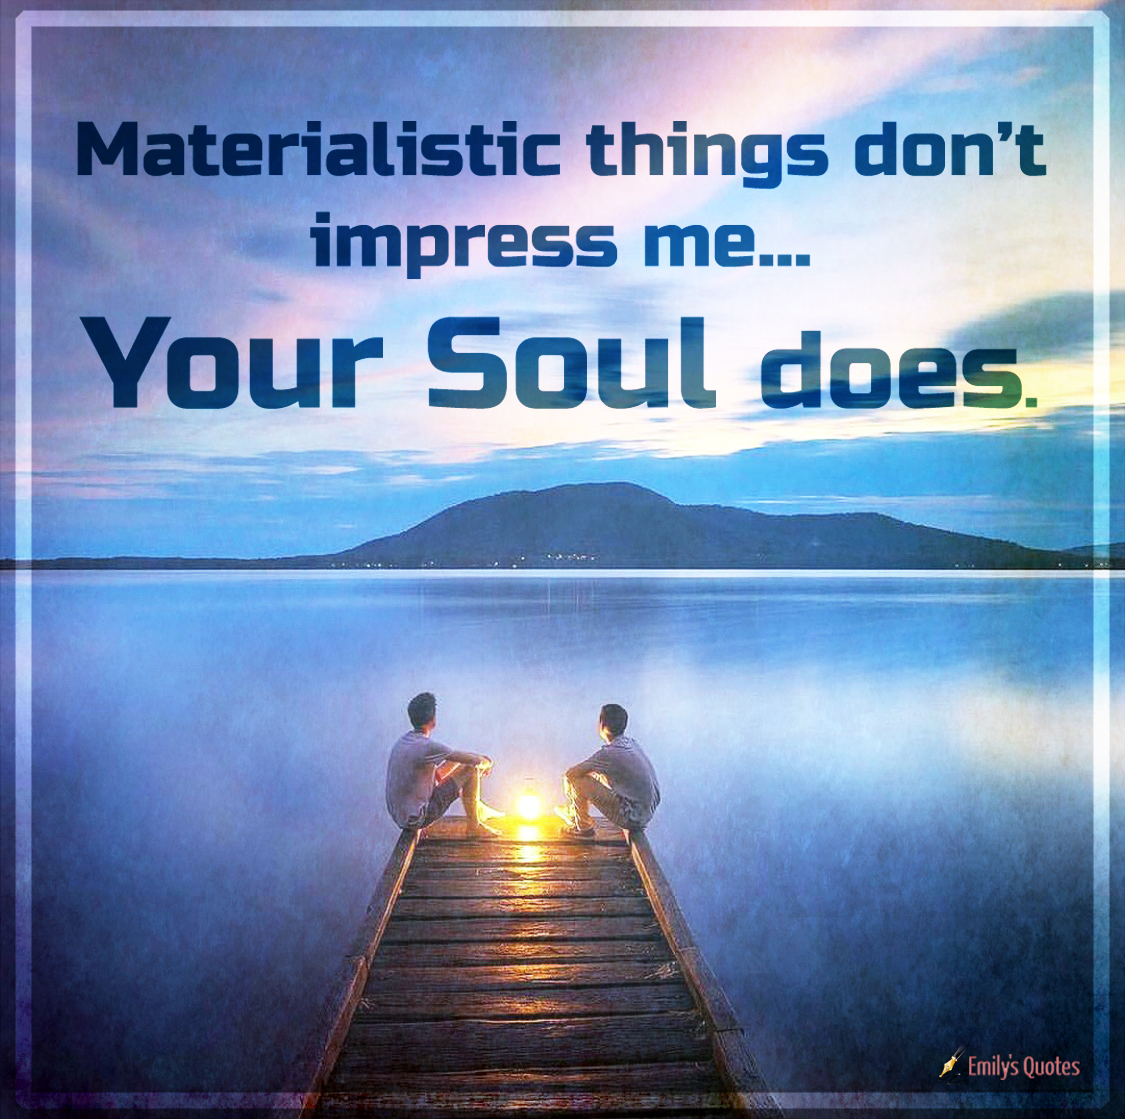 Materialistic things don’t impress me… your soul does